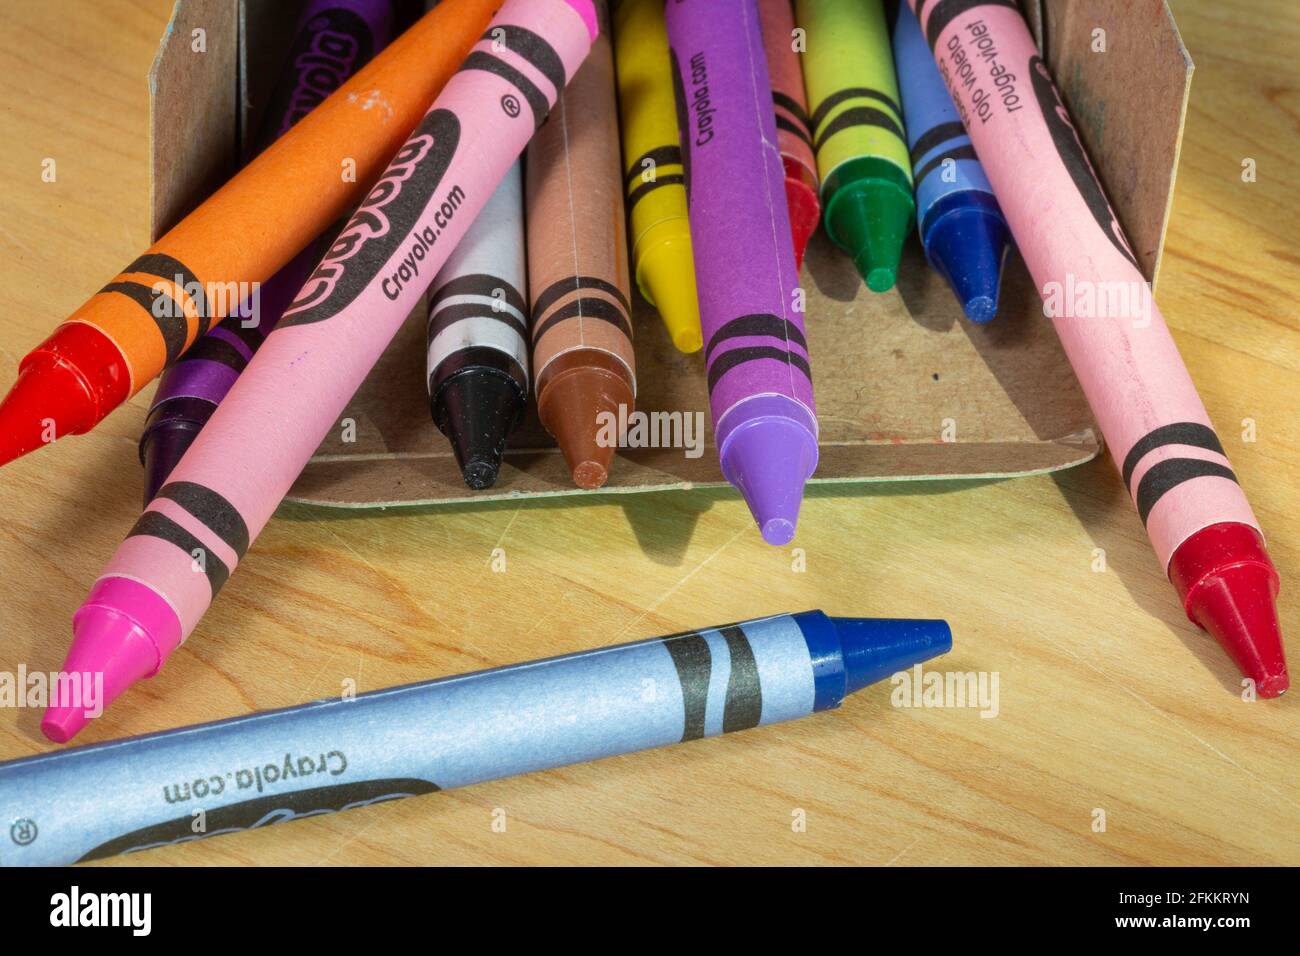 Boxes Of Crayola Markers And Crayons Stock Photo - Download Image Now -  Crayon, Felt Tip Pen, Art and Craft Equipment - iStock